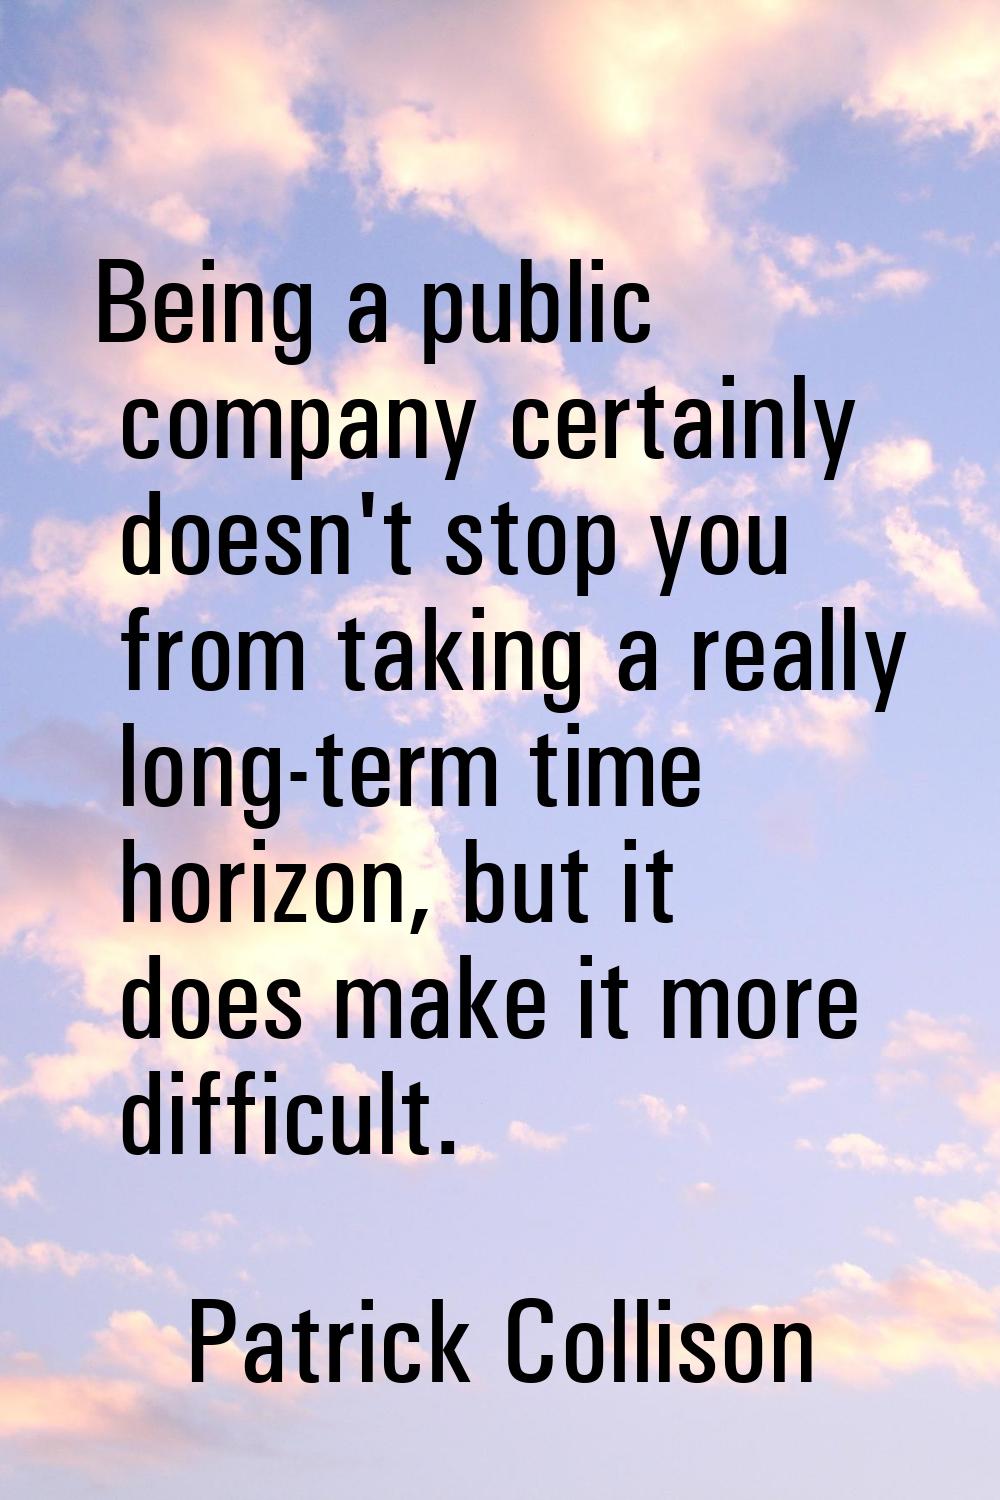 Being a public company certainly doesn't stop you from taking a really long-term time horizon, but 